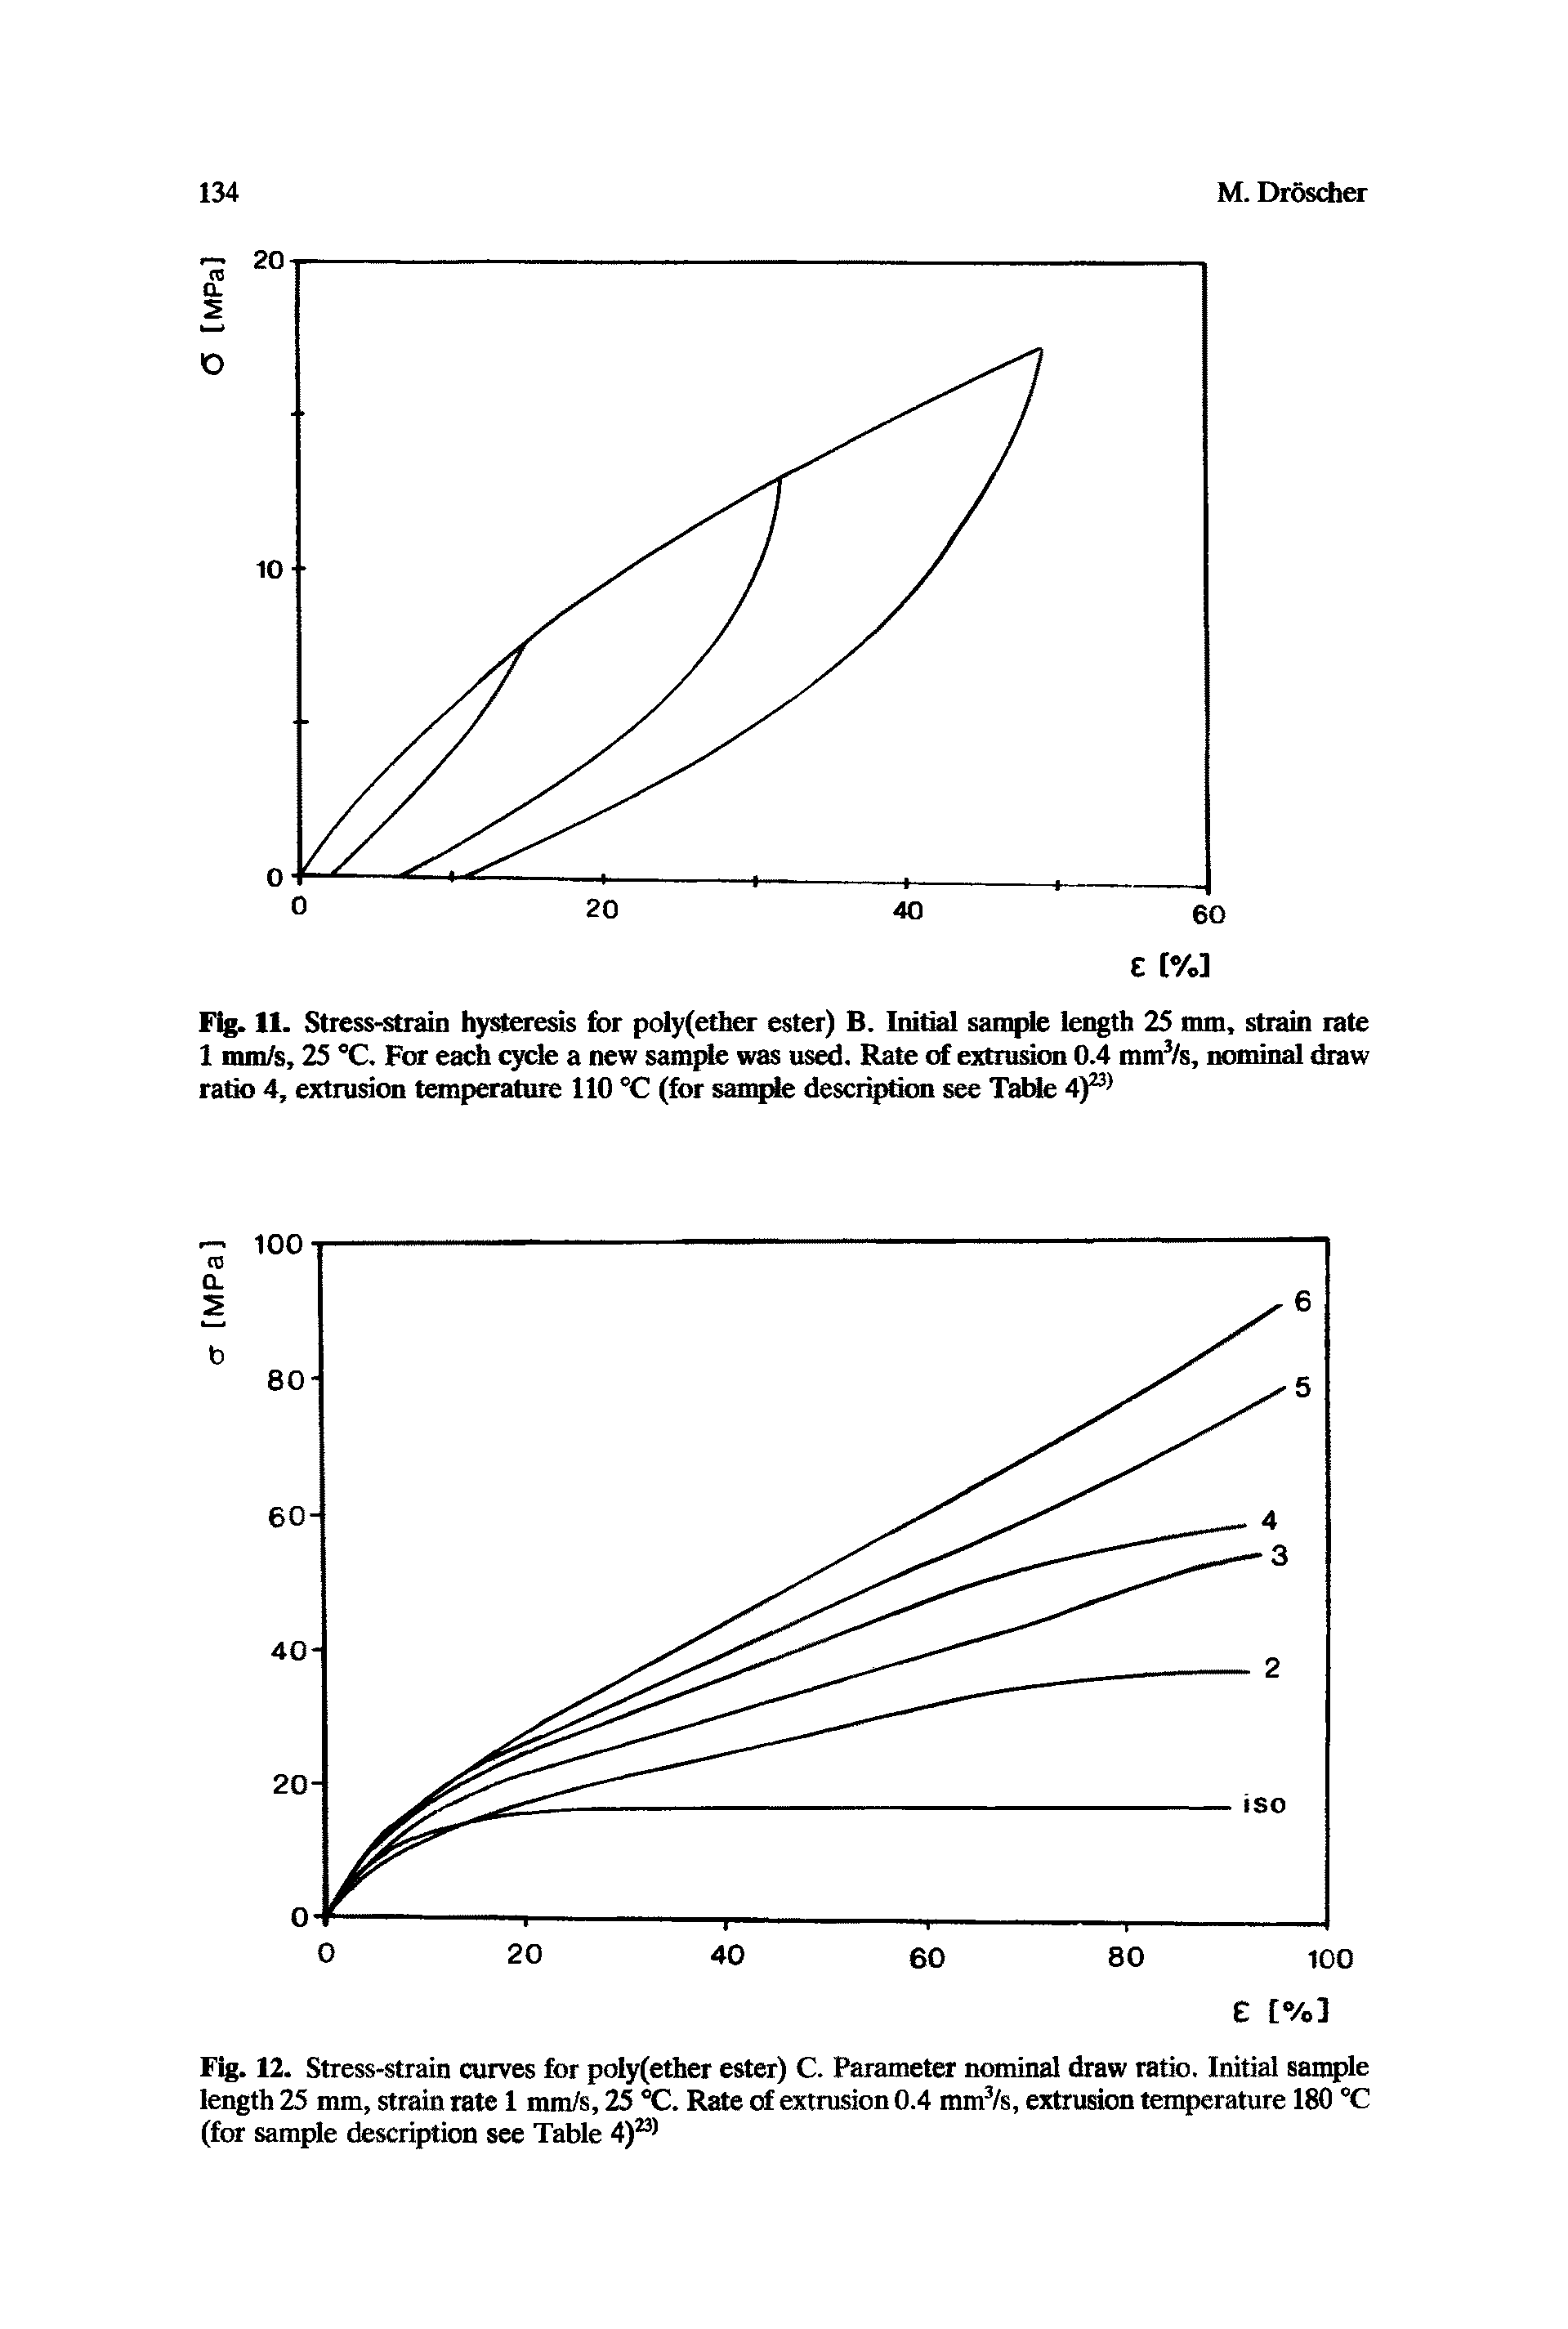 Fig. 12. Stress-strain curves for poly(ether ester) C. Parameter nominal draw ratio. Initial sample length 25 mm, strain rate 1 mm/s, 25 °C. Rate of extrusion 0.4 mm3/s, extrusion temperature 180 °C (for sample description see Table 4)M)...